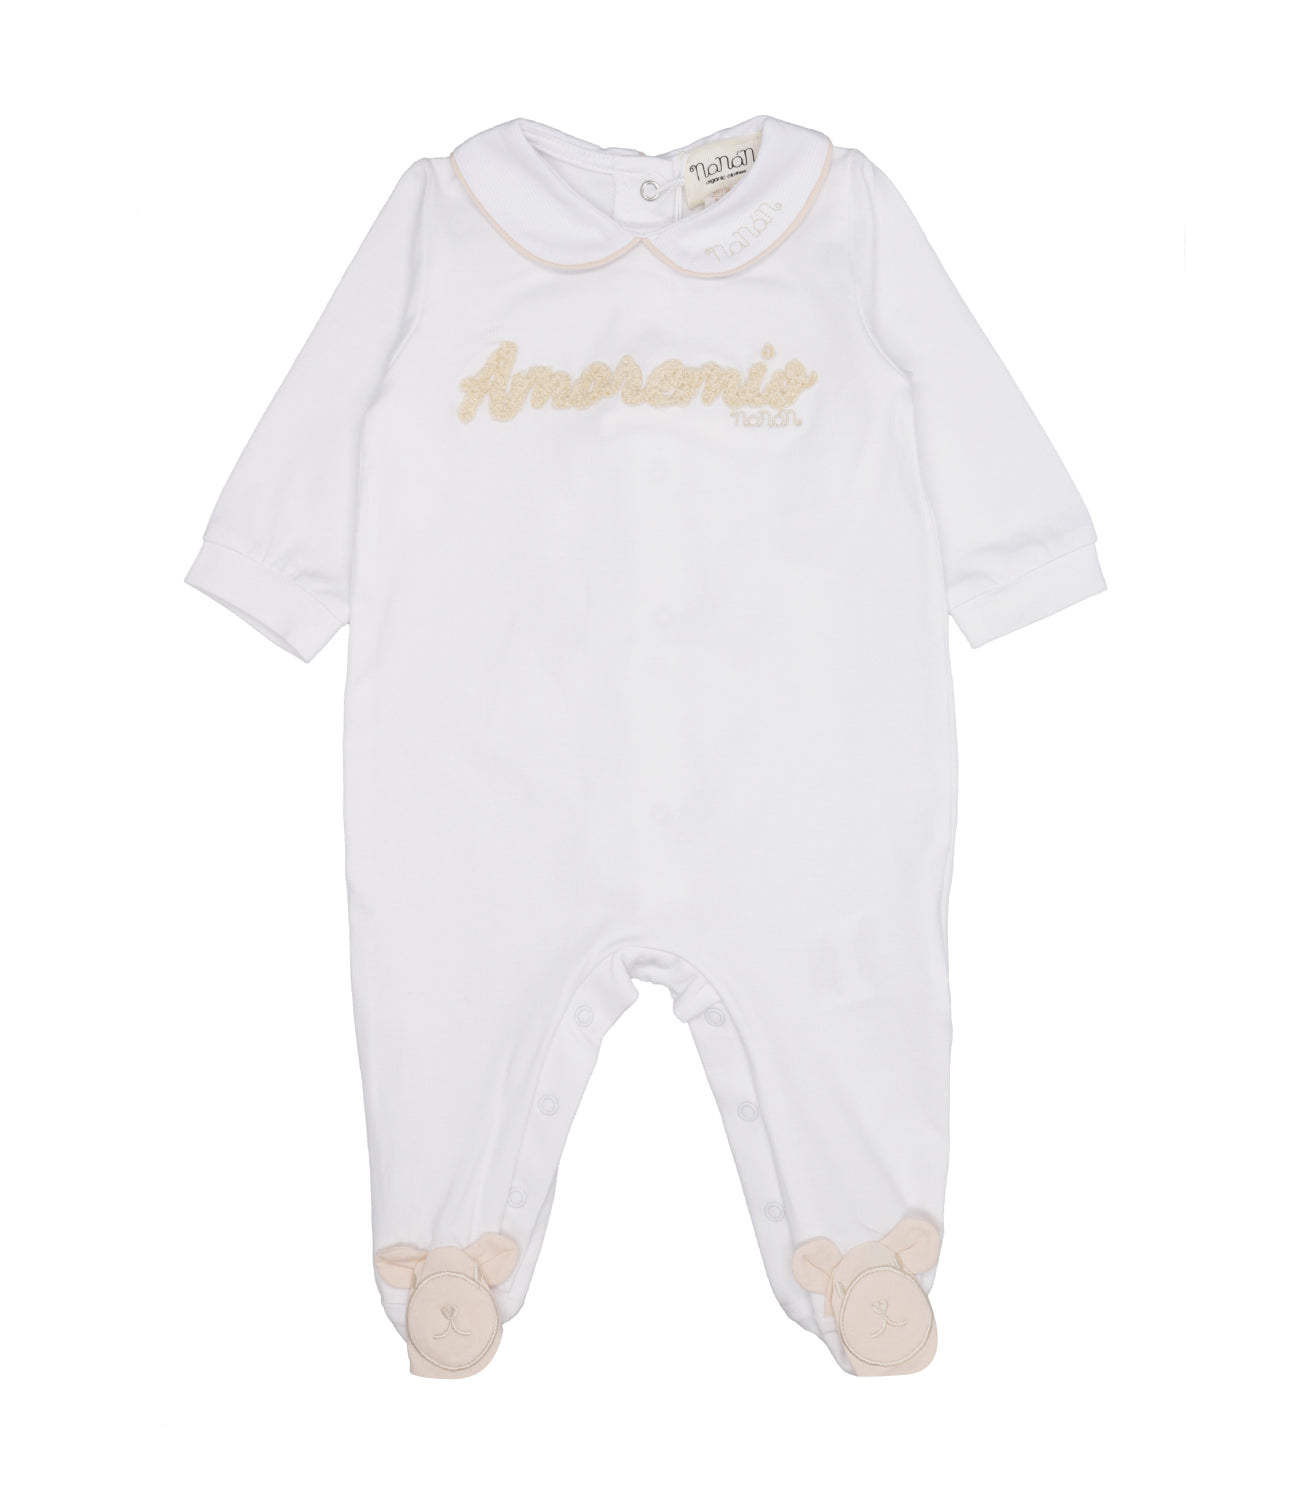 Nanan | White and Beige Sleepsuit